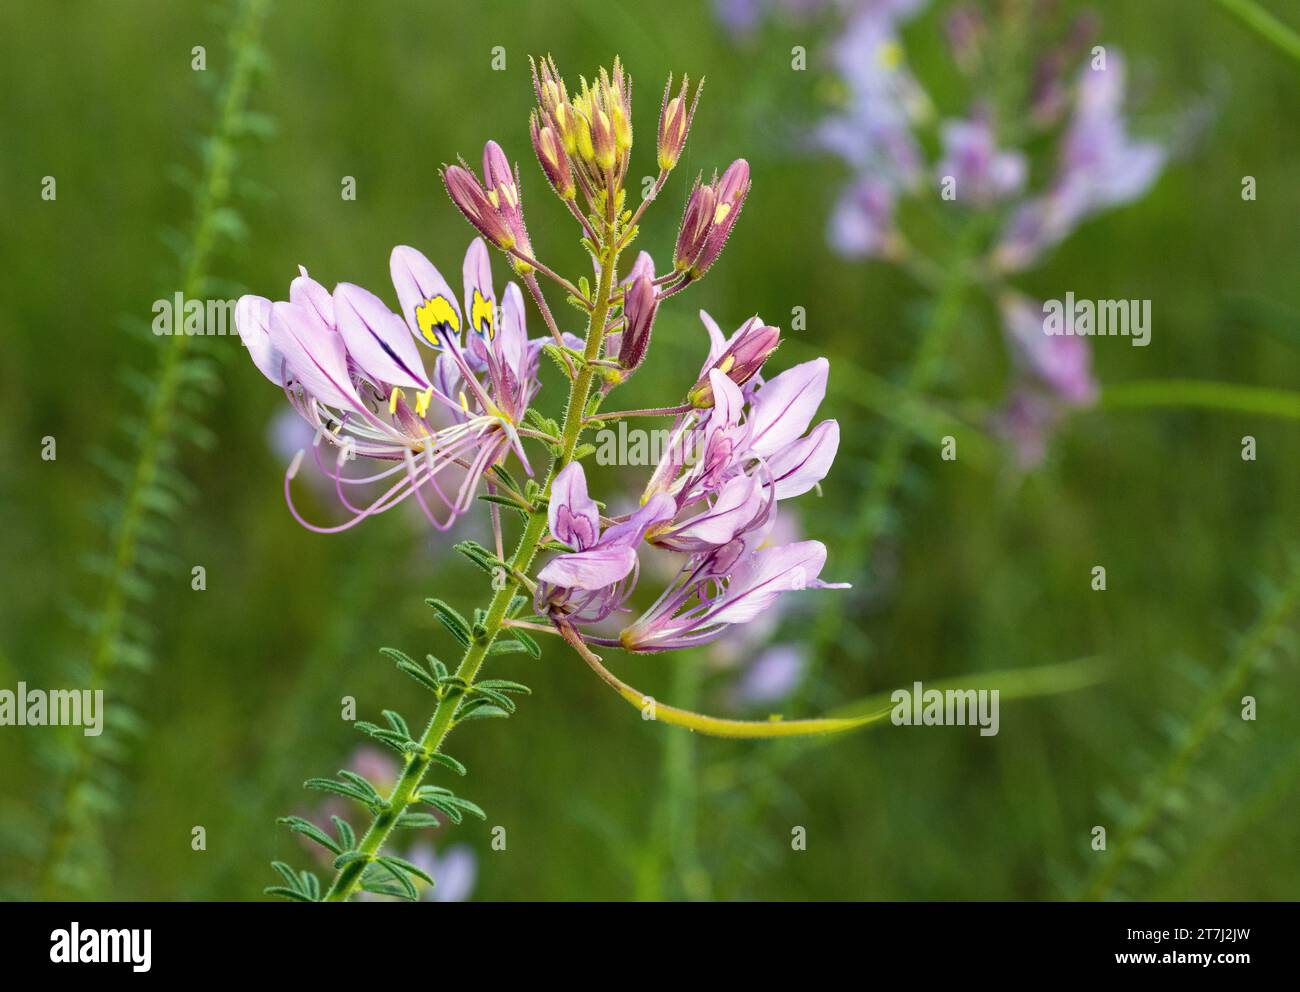 The flowers of the Pretty lady are a common sight during the rainy season, particularly on sandy soils in the semi-arid savannas. Stock Photo